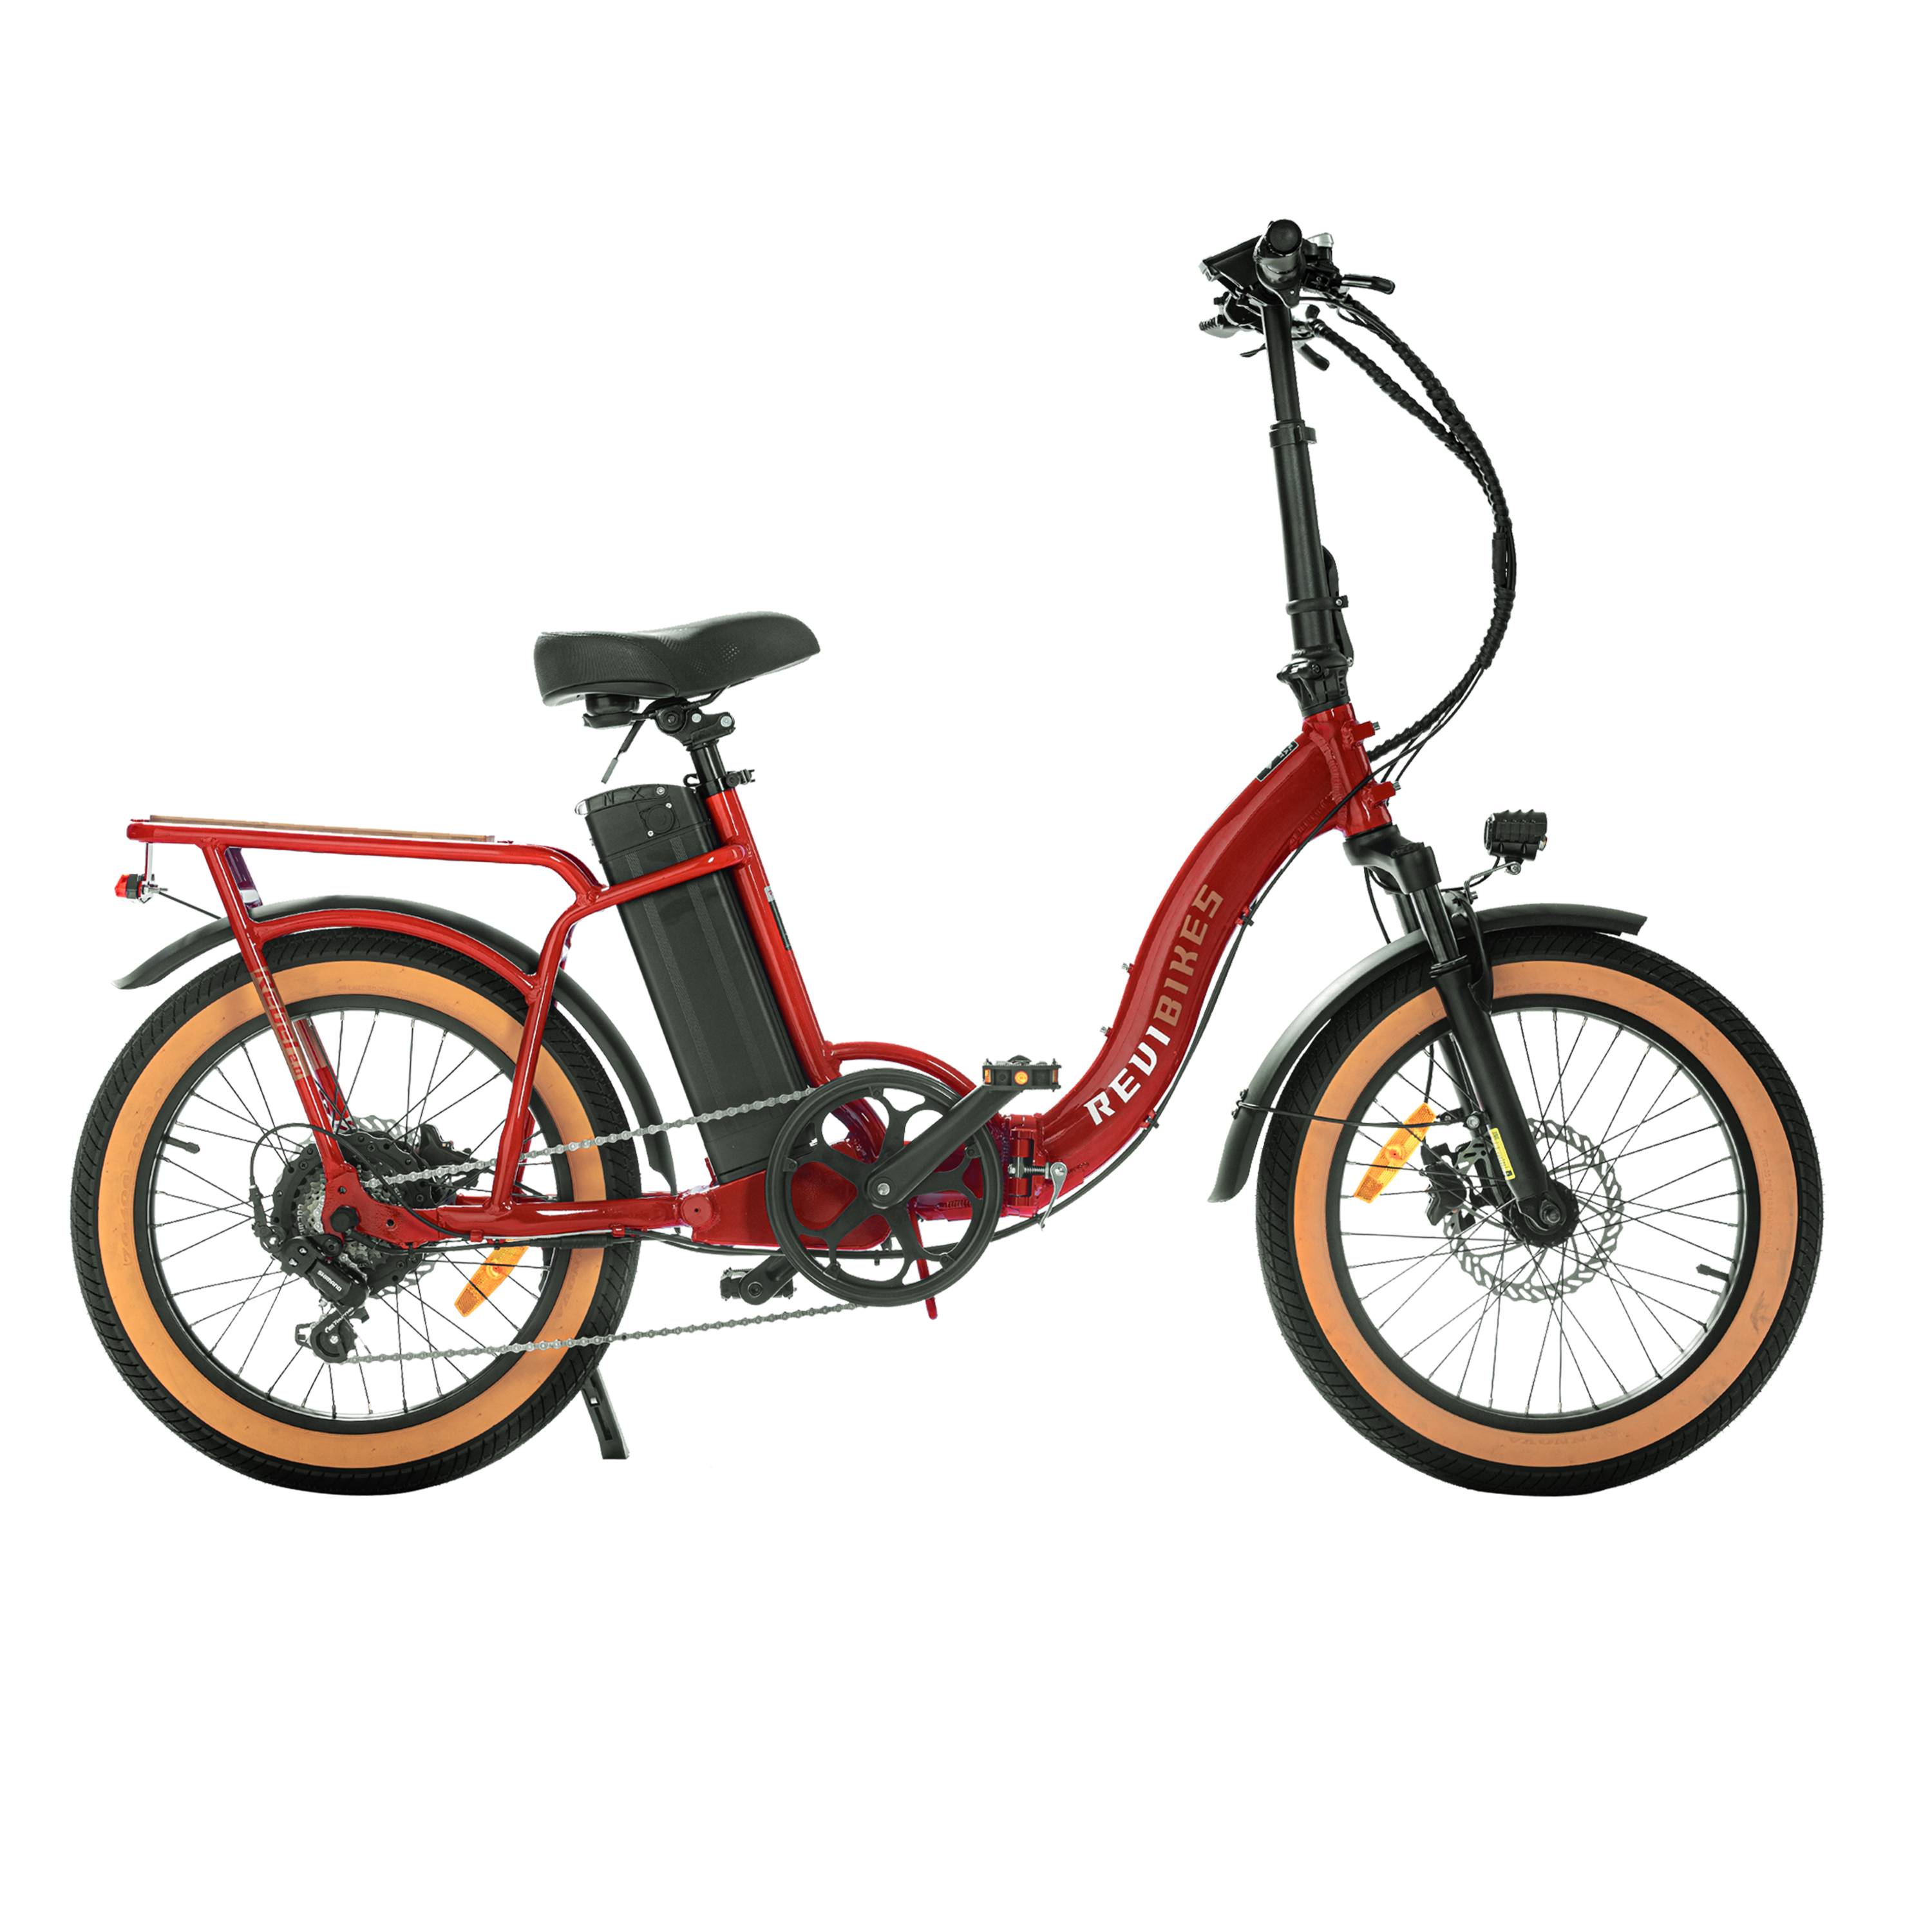 Revibikes 20" red ebike women's folding electric bike compact utility ebike foldable fat tire affordable ebikes ladies throttle electric bicycle commuter step through ebike 48V 750W 15ah folding electric bike for adults fold up ebike for short ladies under $1000 best pedal assist bike urban ebikes folding 20"ebike vtuvia sf20 foldable electric bike folding fat tire wiht removable battery